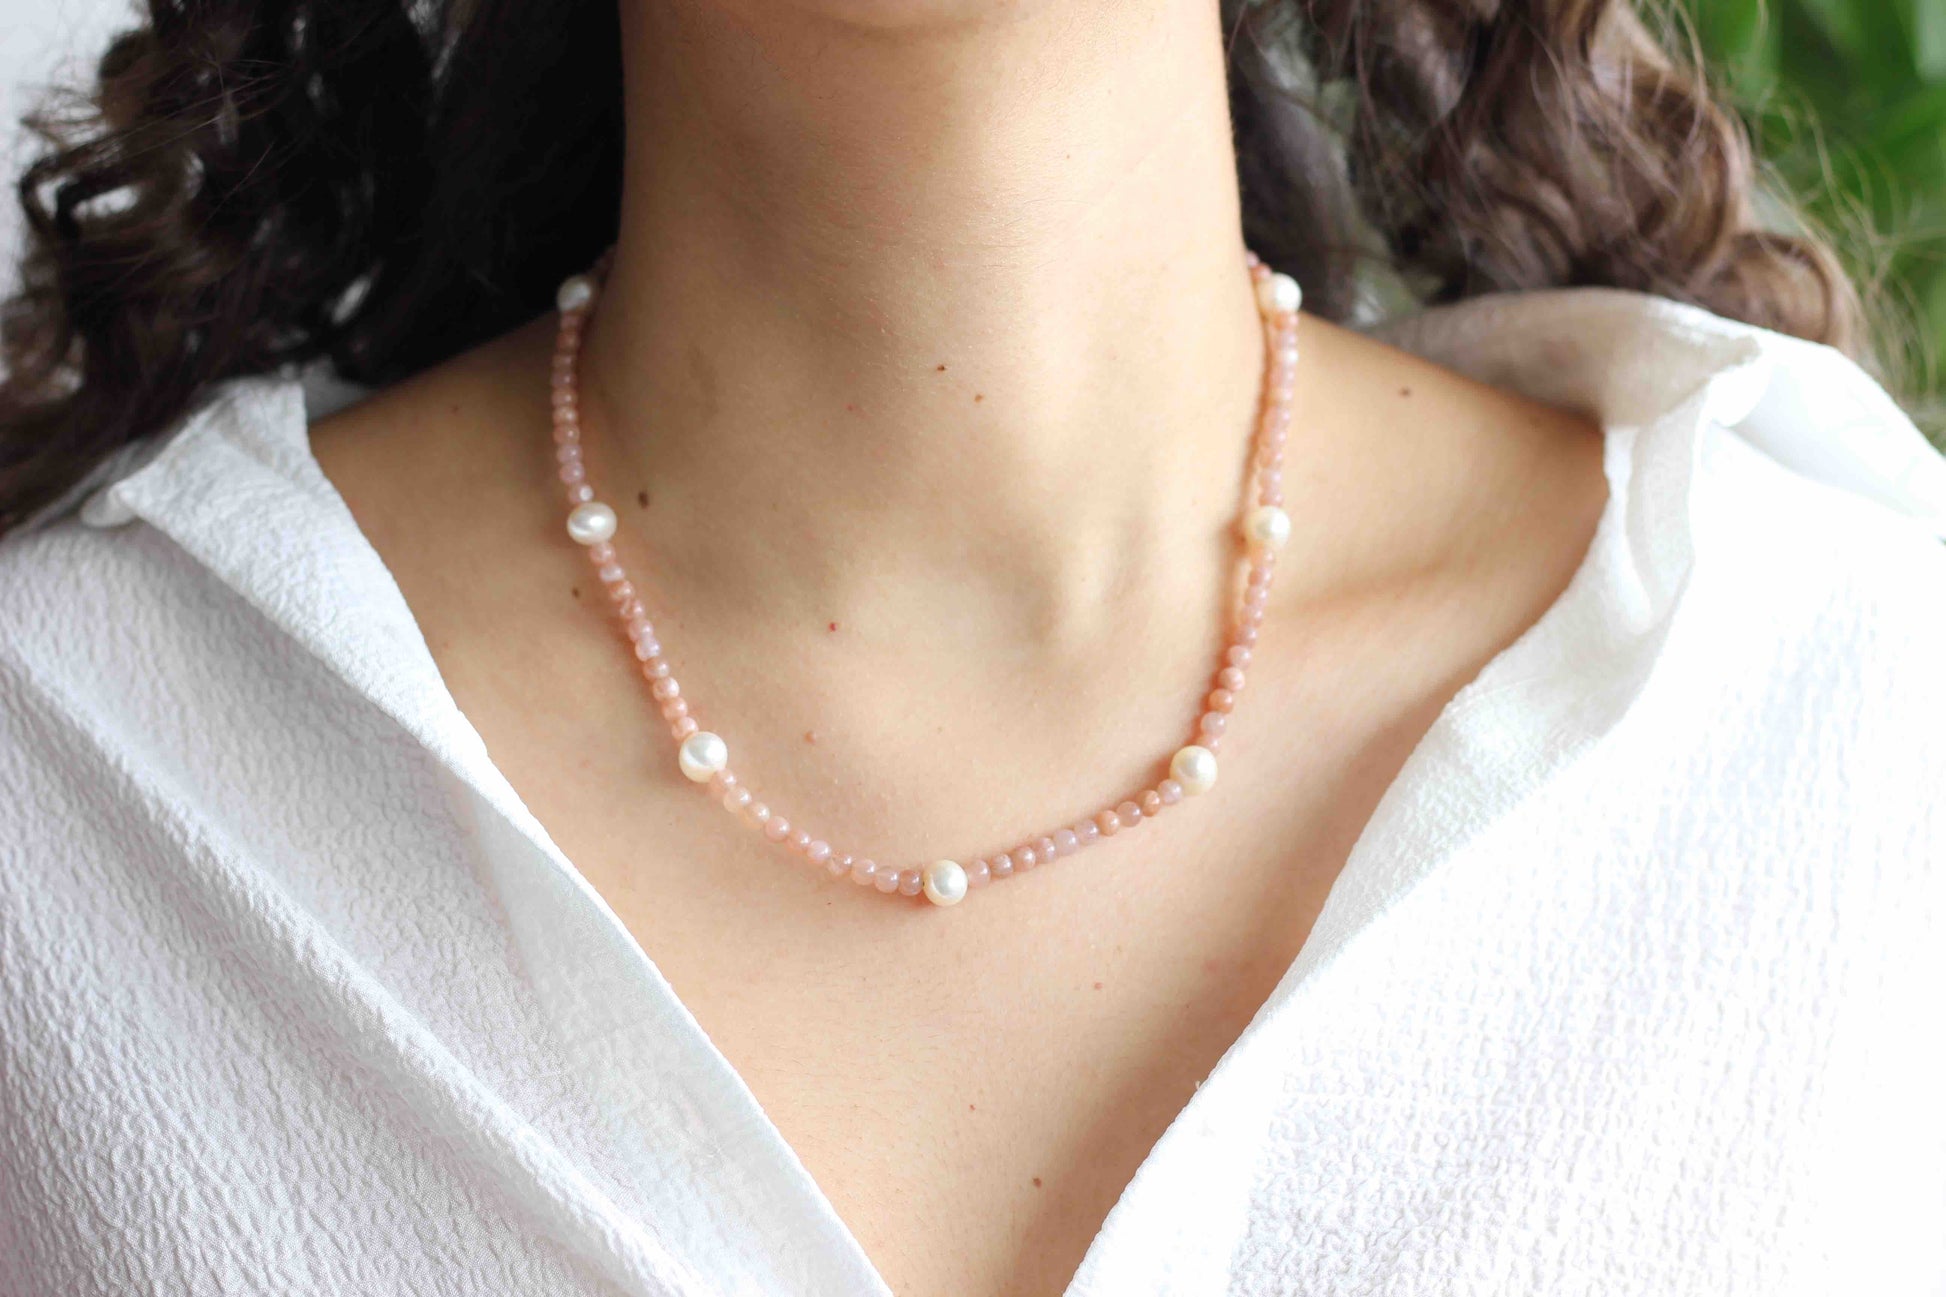 Pink Moonstone Pearl Necklace, Pearl Necklace, Moonstone Necklace, Gemstone Necklace, Necklace for Women, Moonstone Jewelry